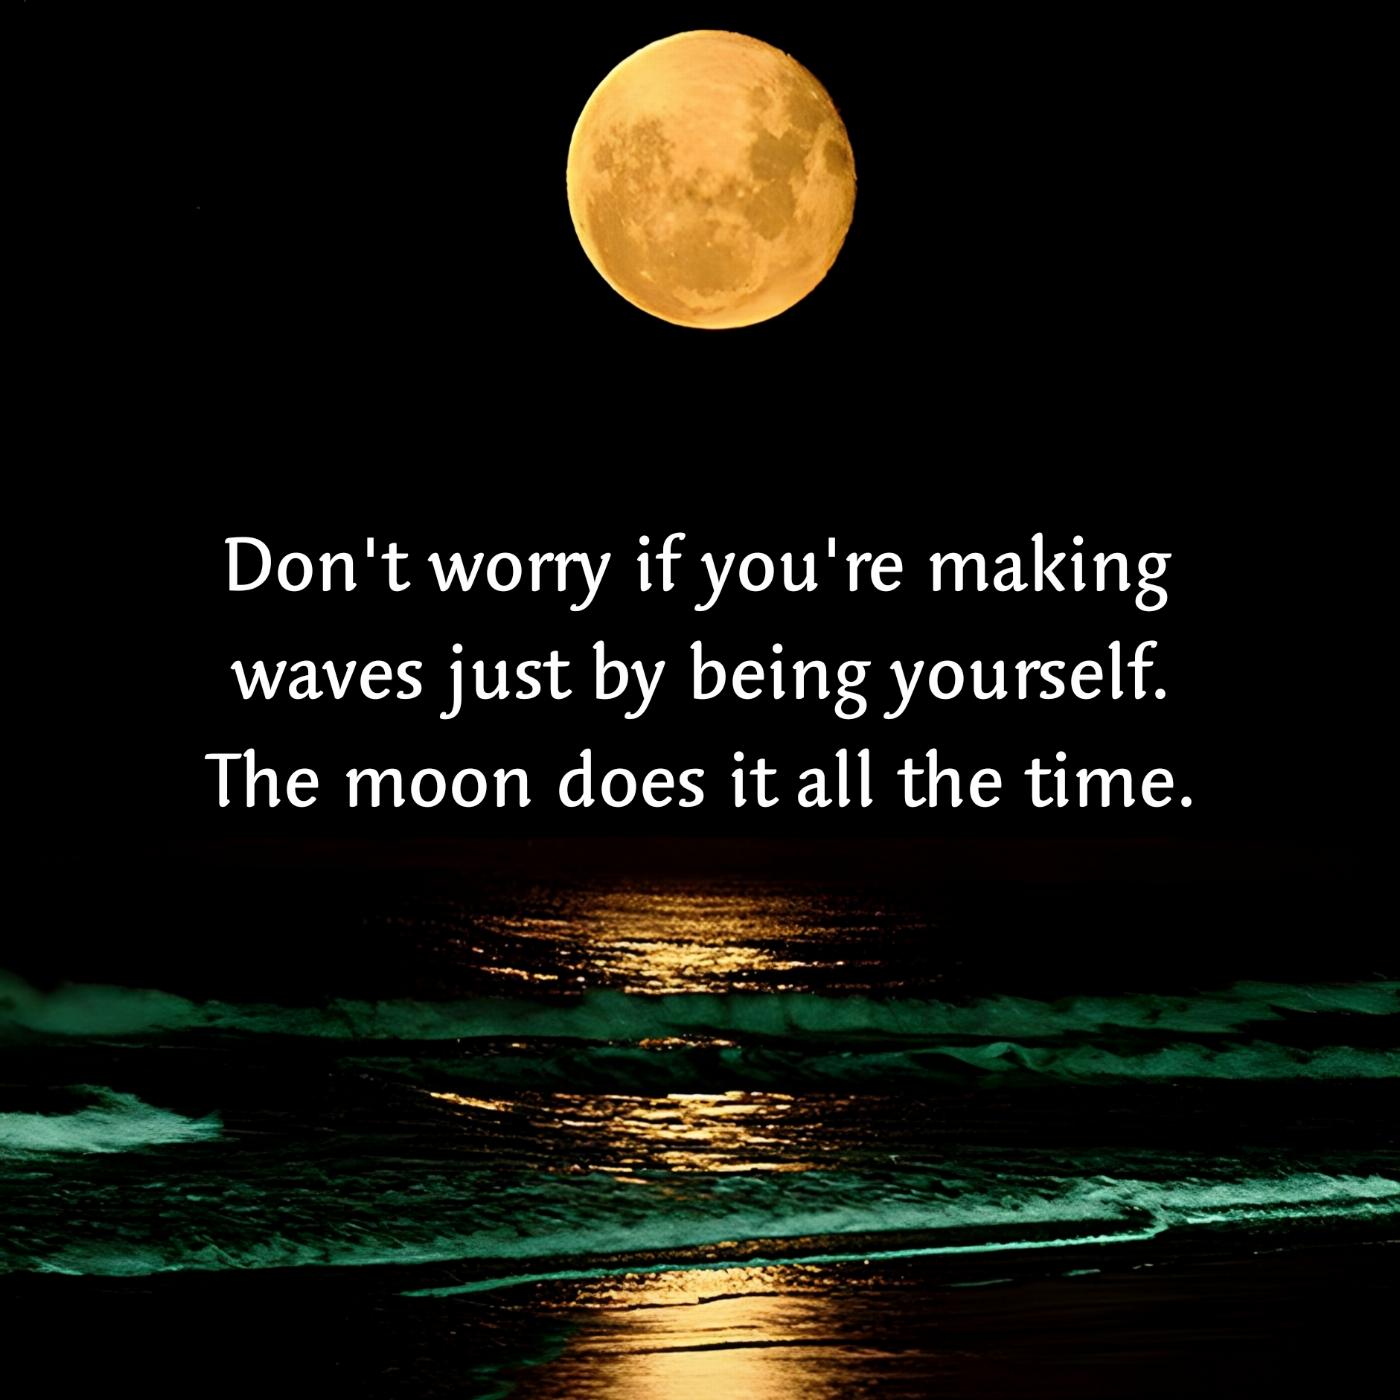 Don't worry if you're making waves just by being yourself